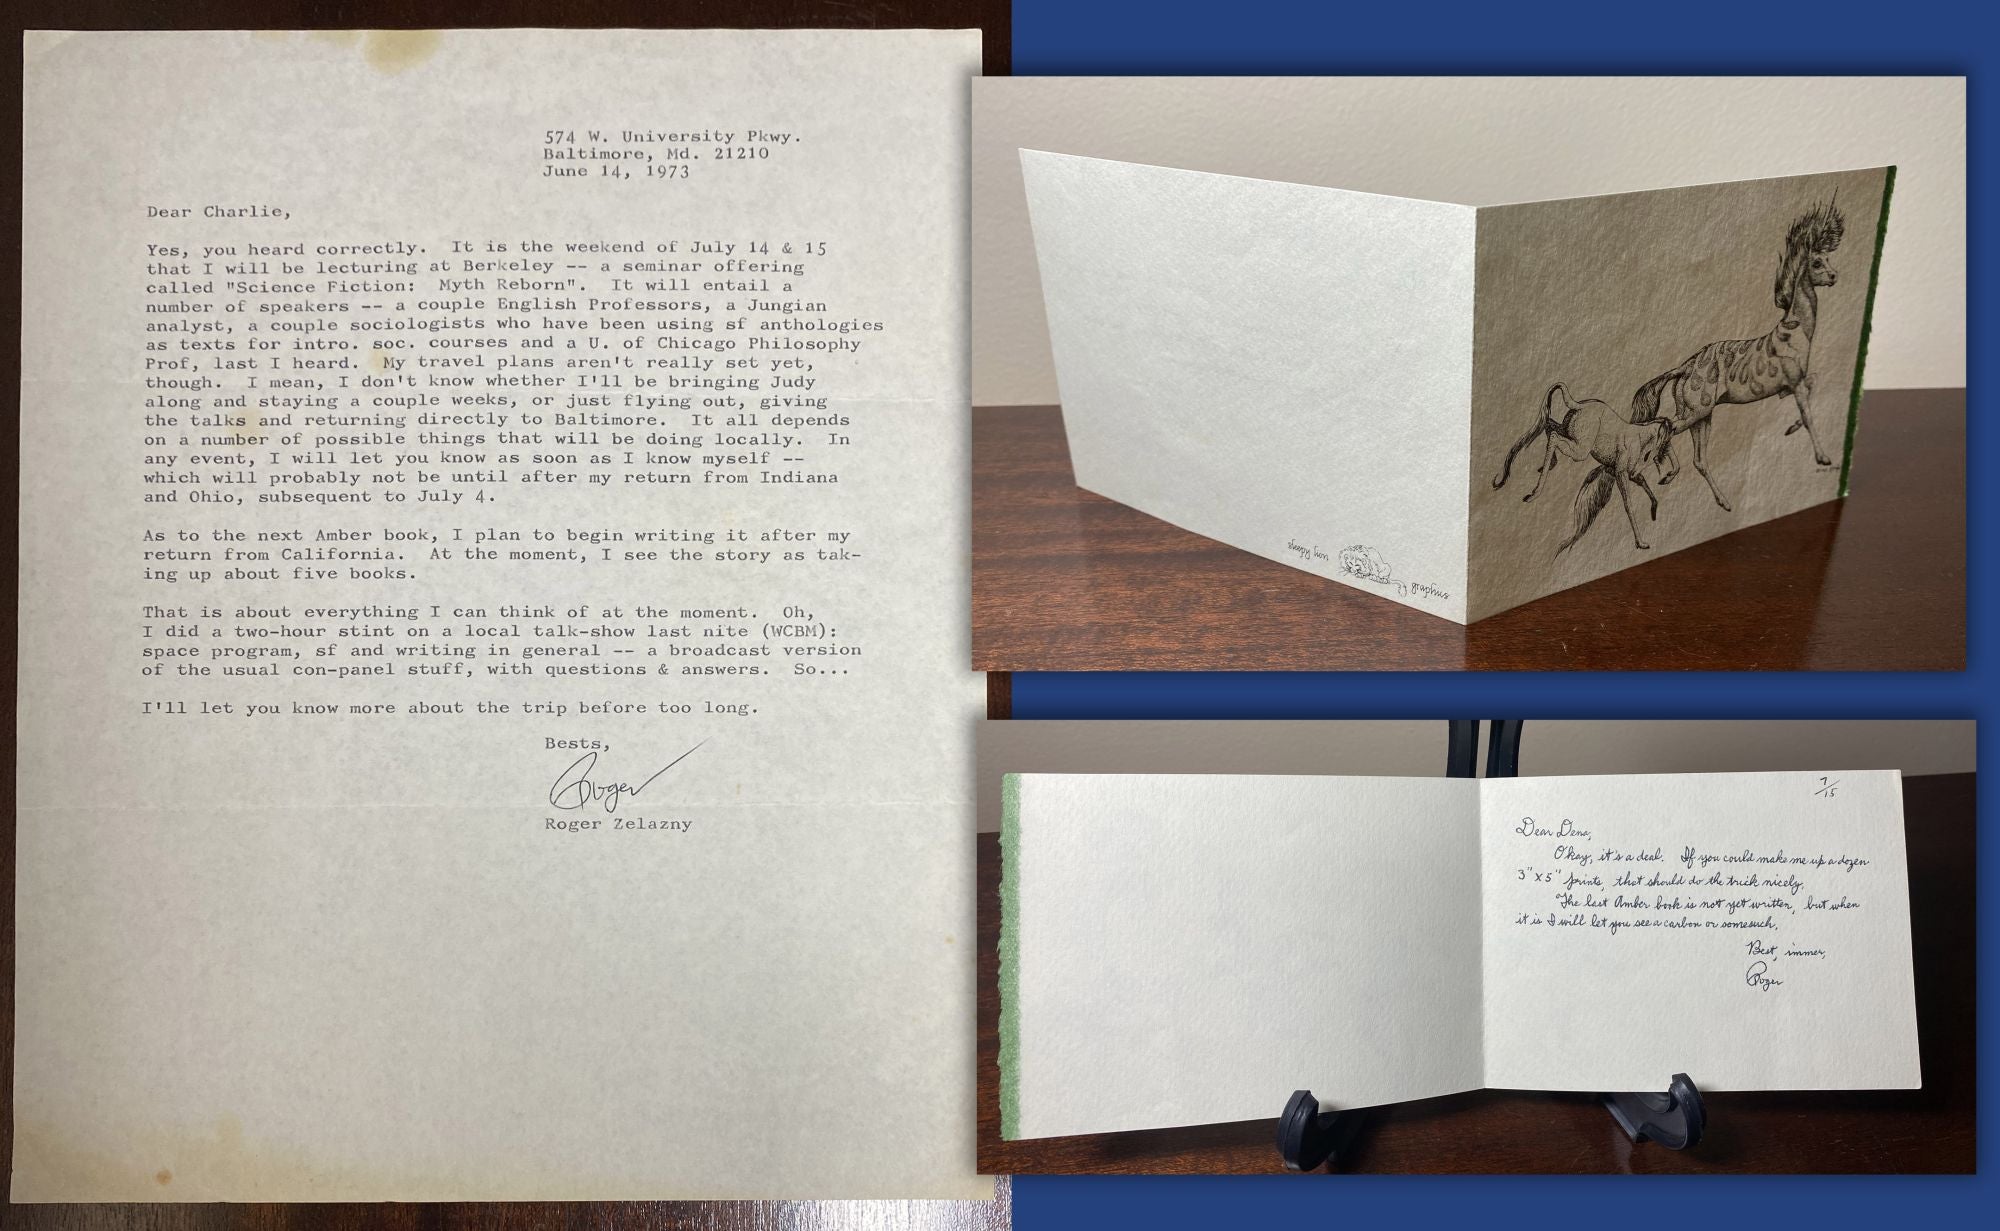 Zelazny, Roger - 1 Autograph Letter Typed and Signed (Als) Plus 1 Handwritten Note Card Signed